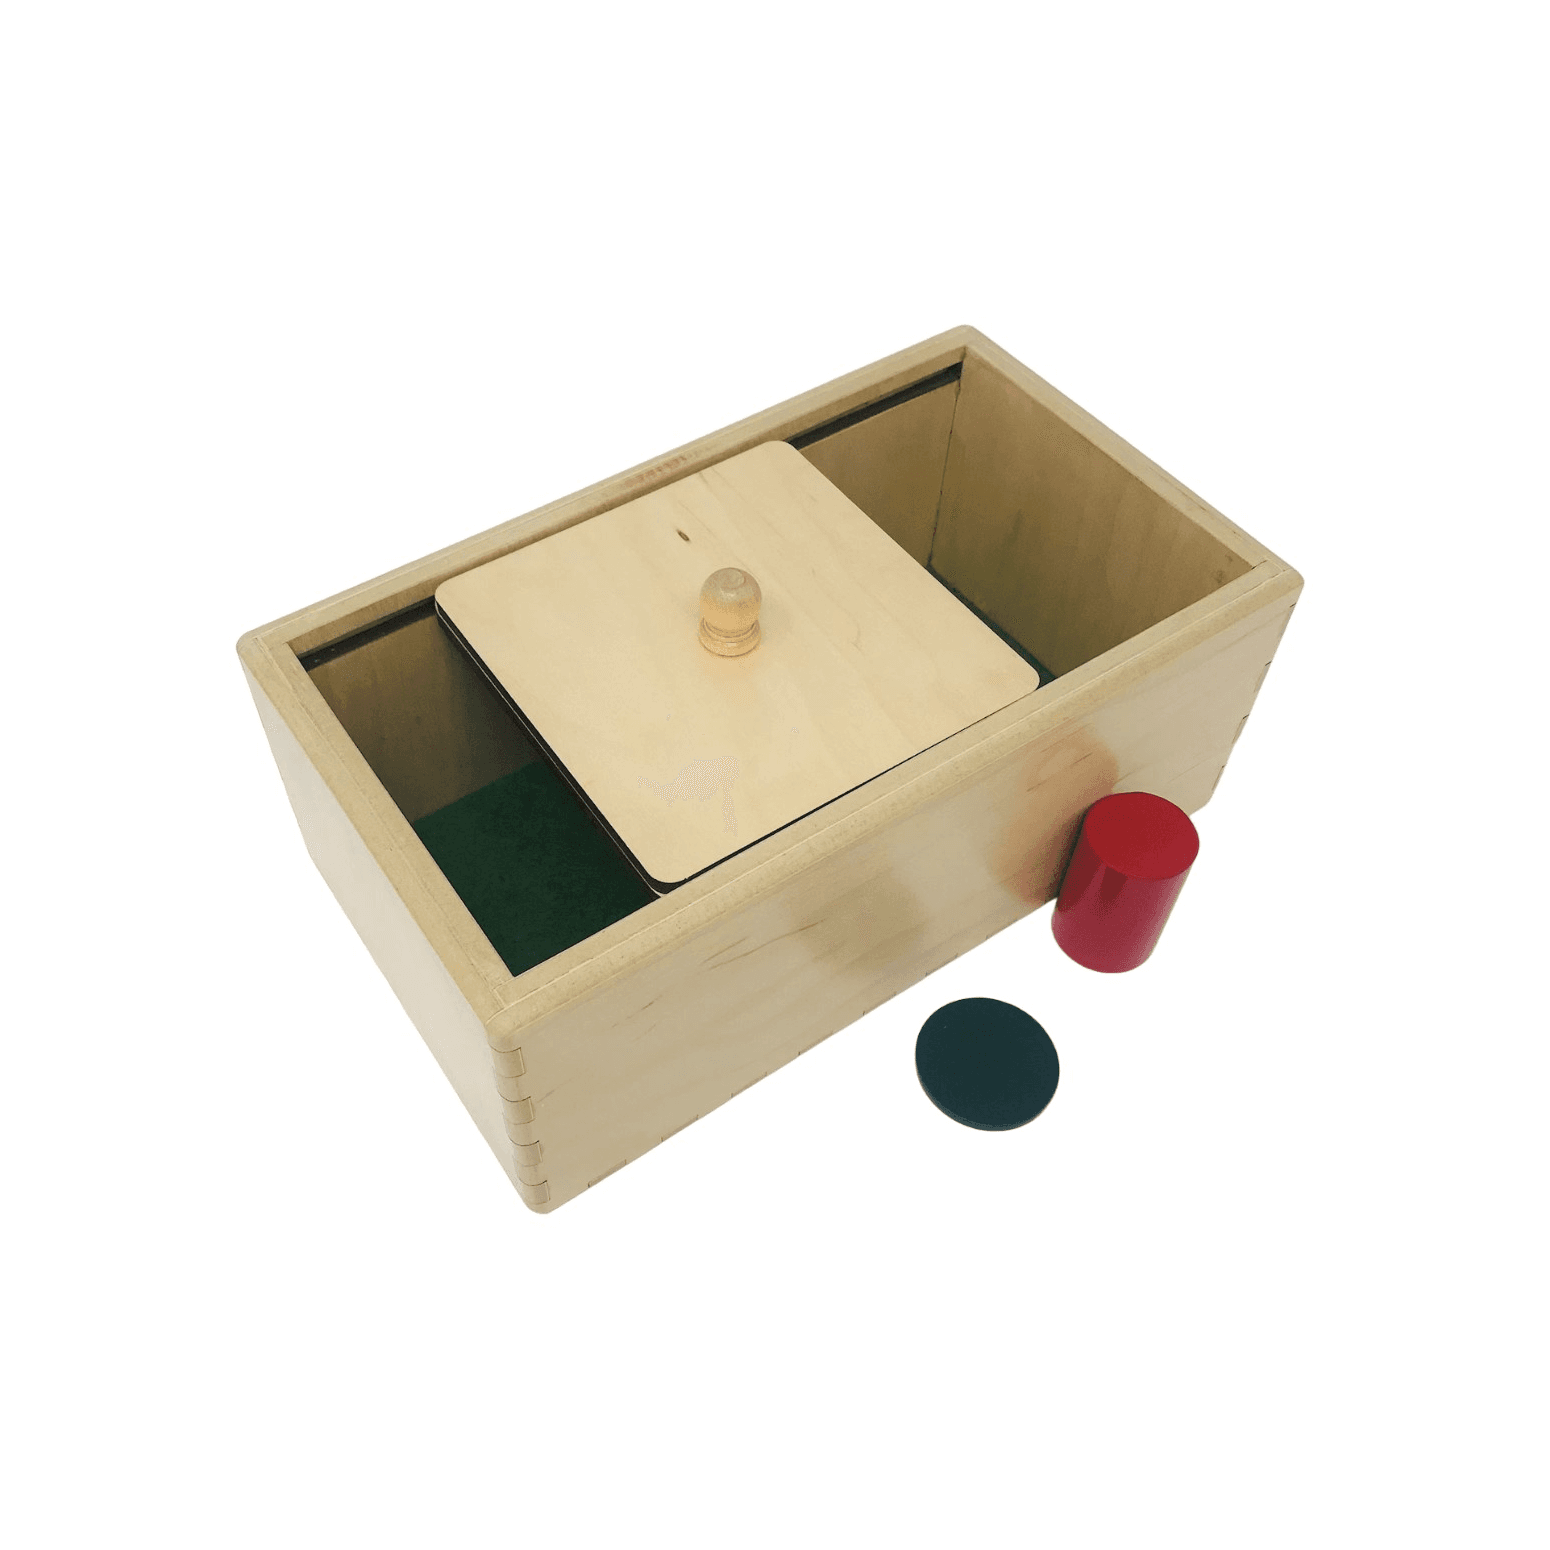 Montessori Nafees Creations Imbucare Box With Sliding Lid With Coin and Cylinder Bare Wood Waxed